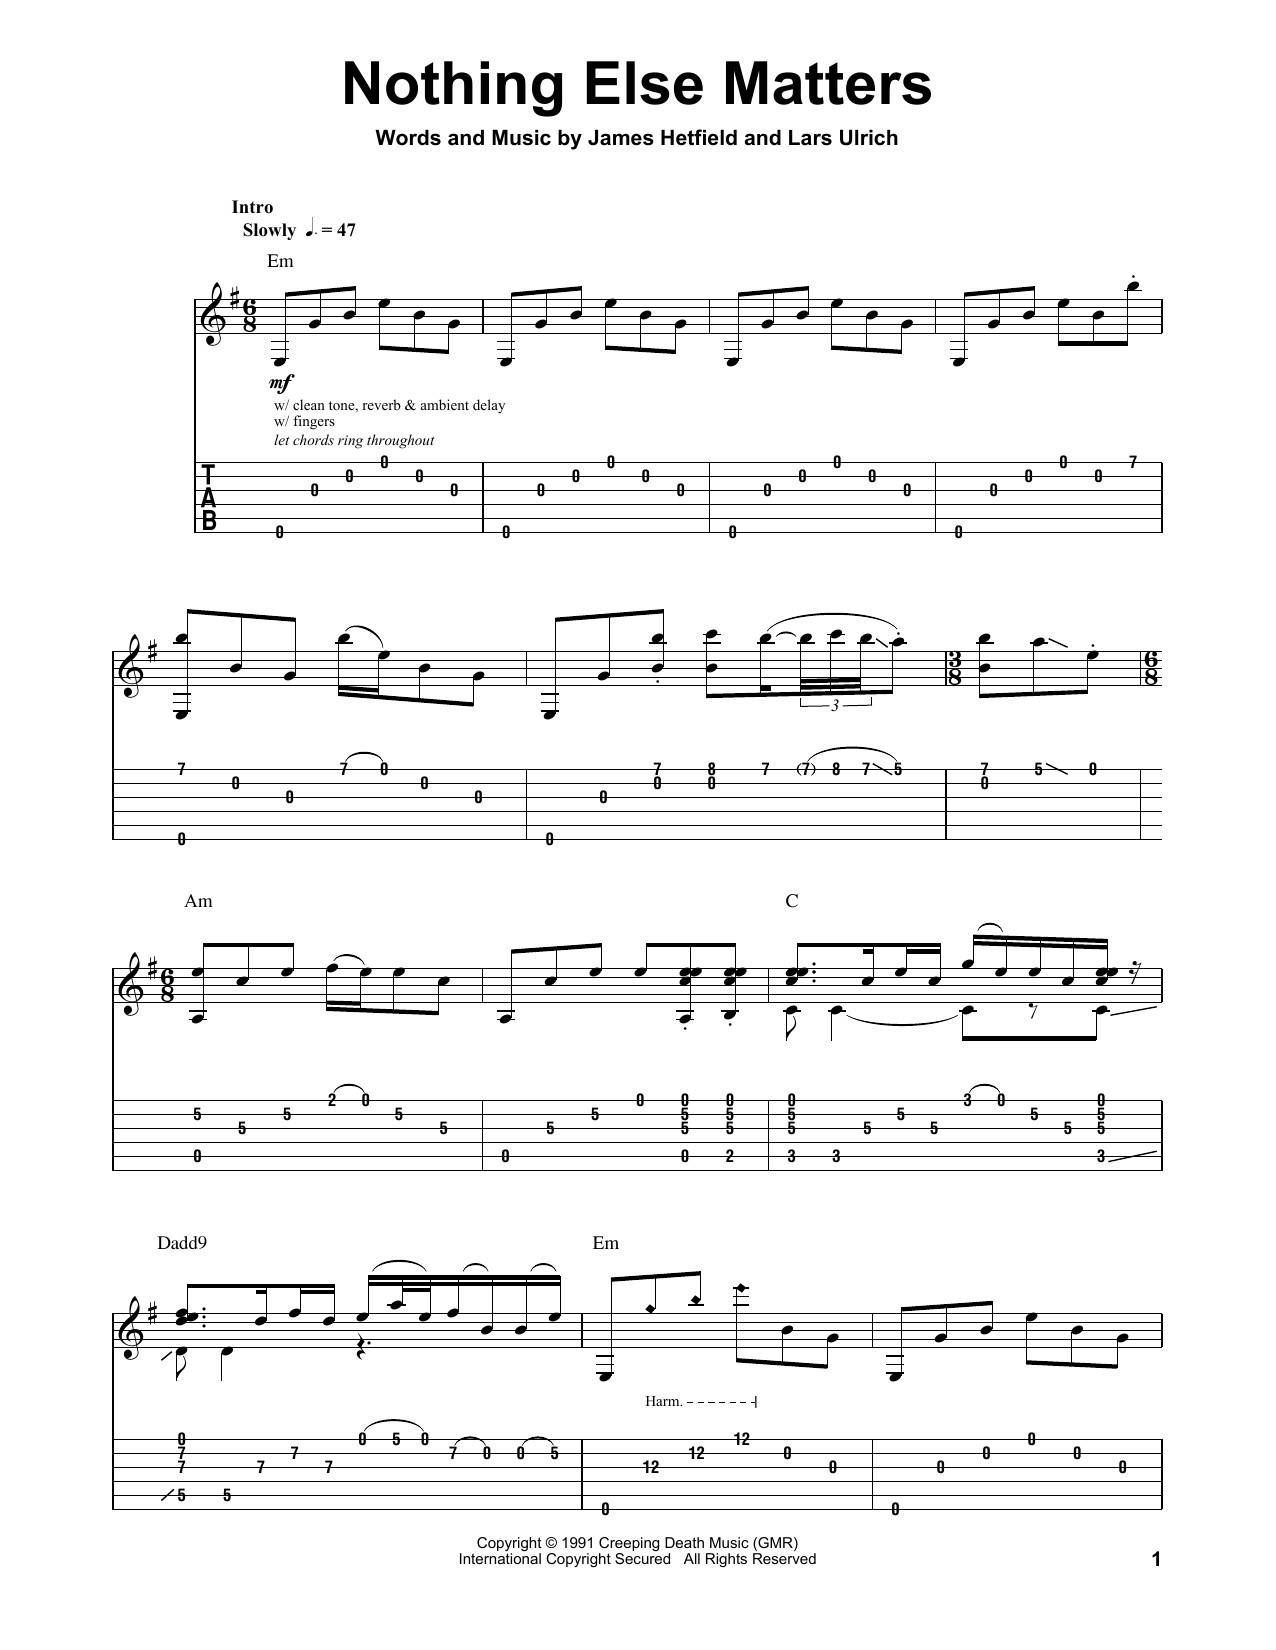 Nothing Else Matters Guitar
 Nothing Else Matters by Metallica Guitar Tab Play Along